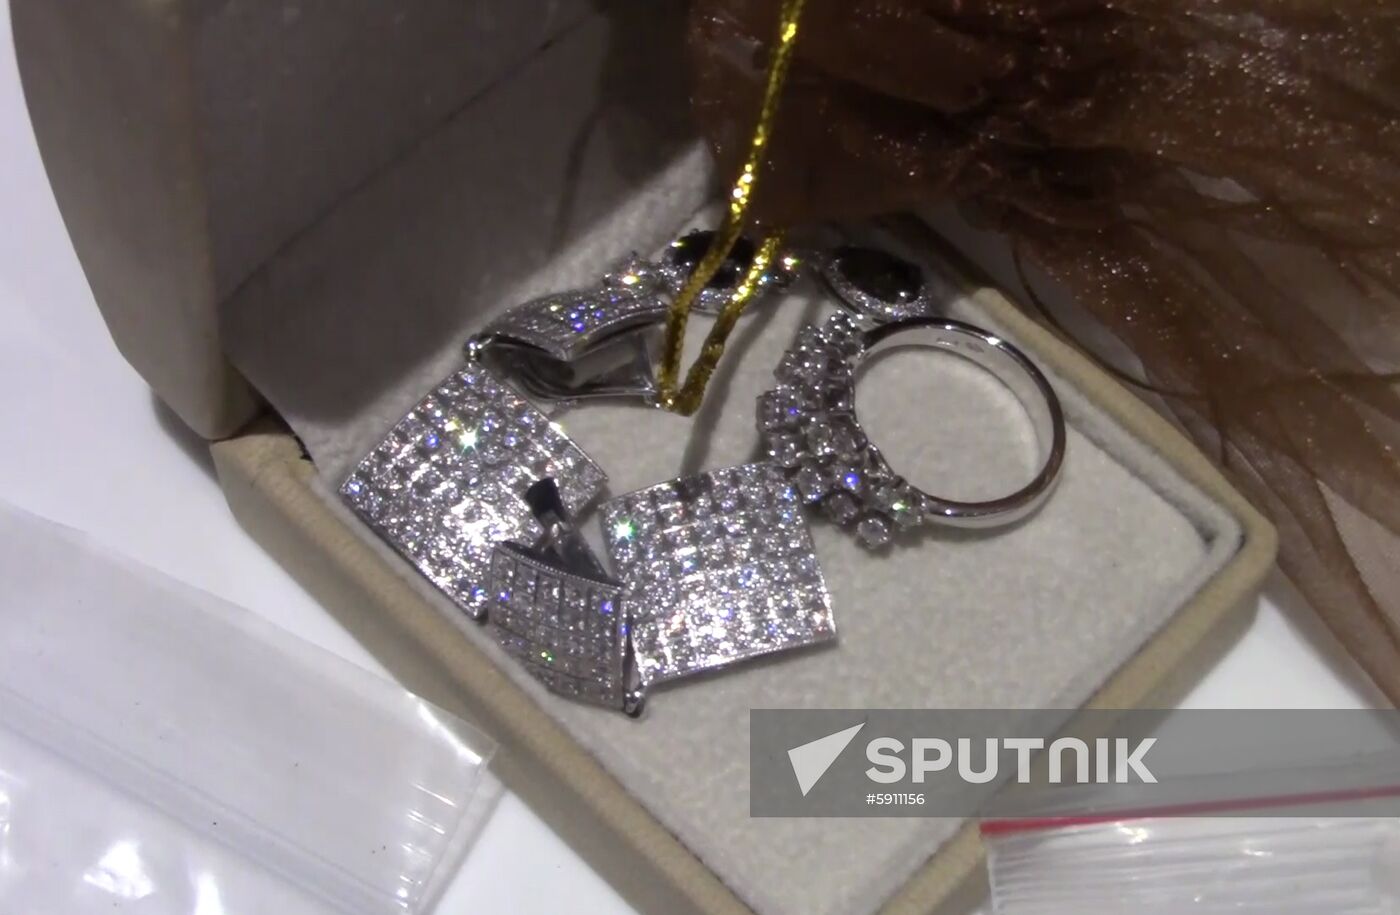 Russia Diamond Smugglers Detained